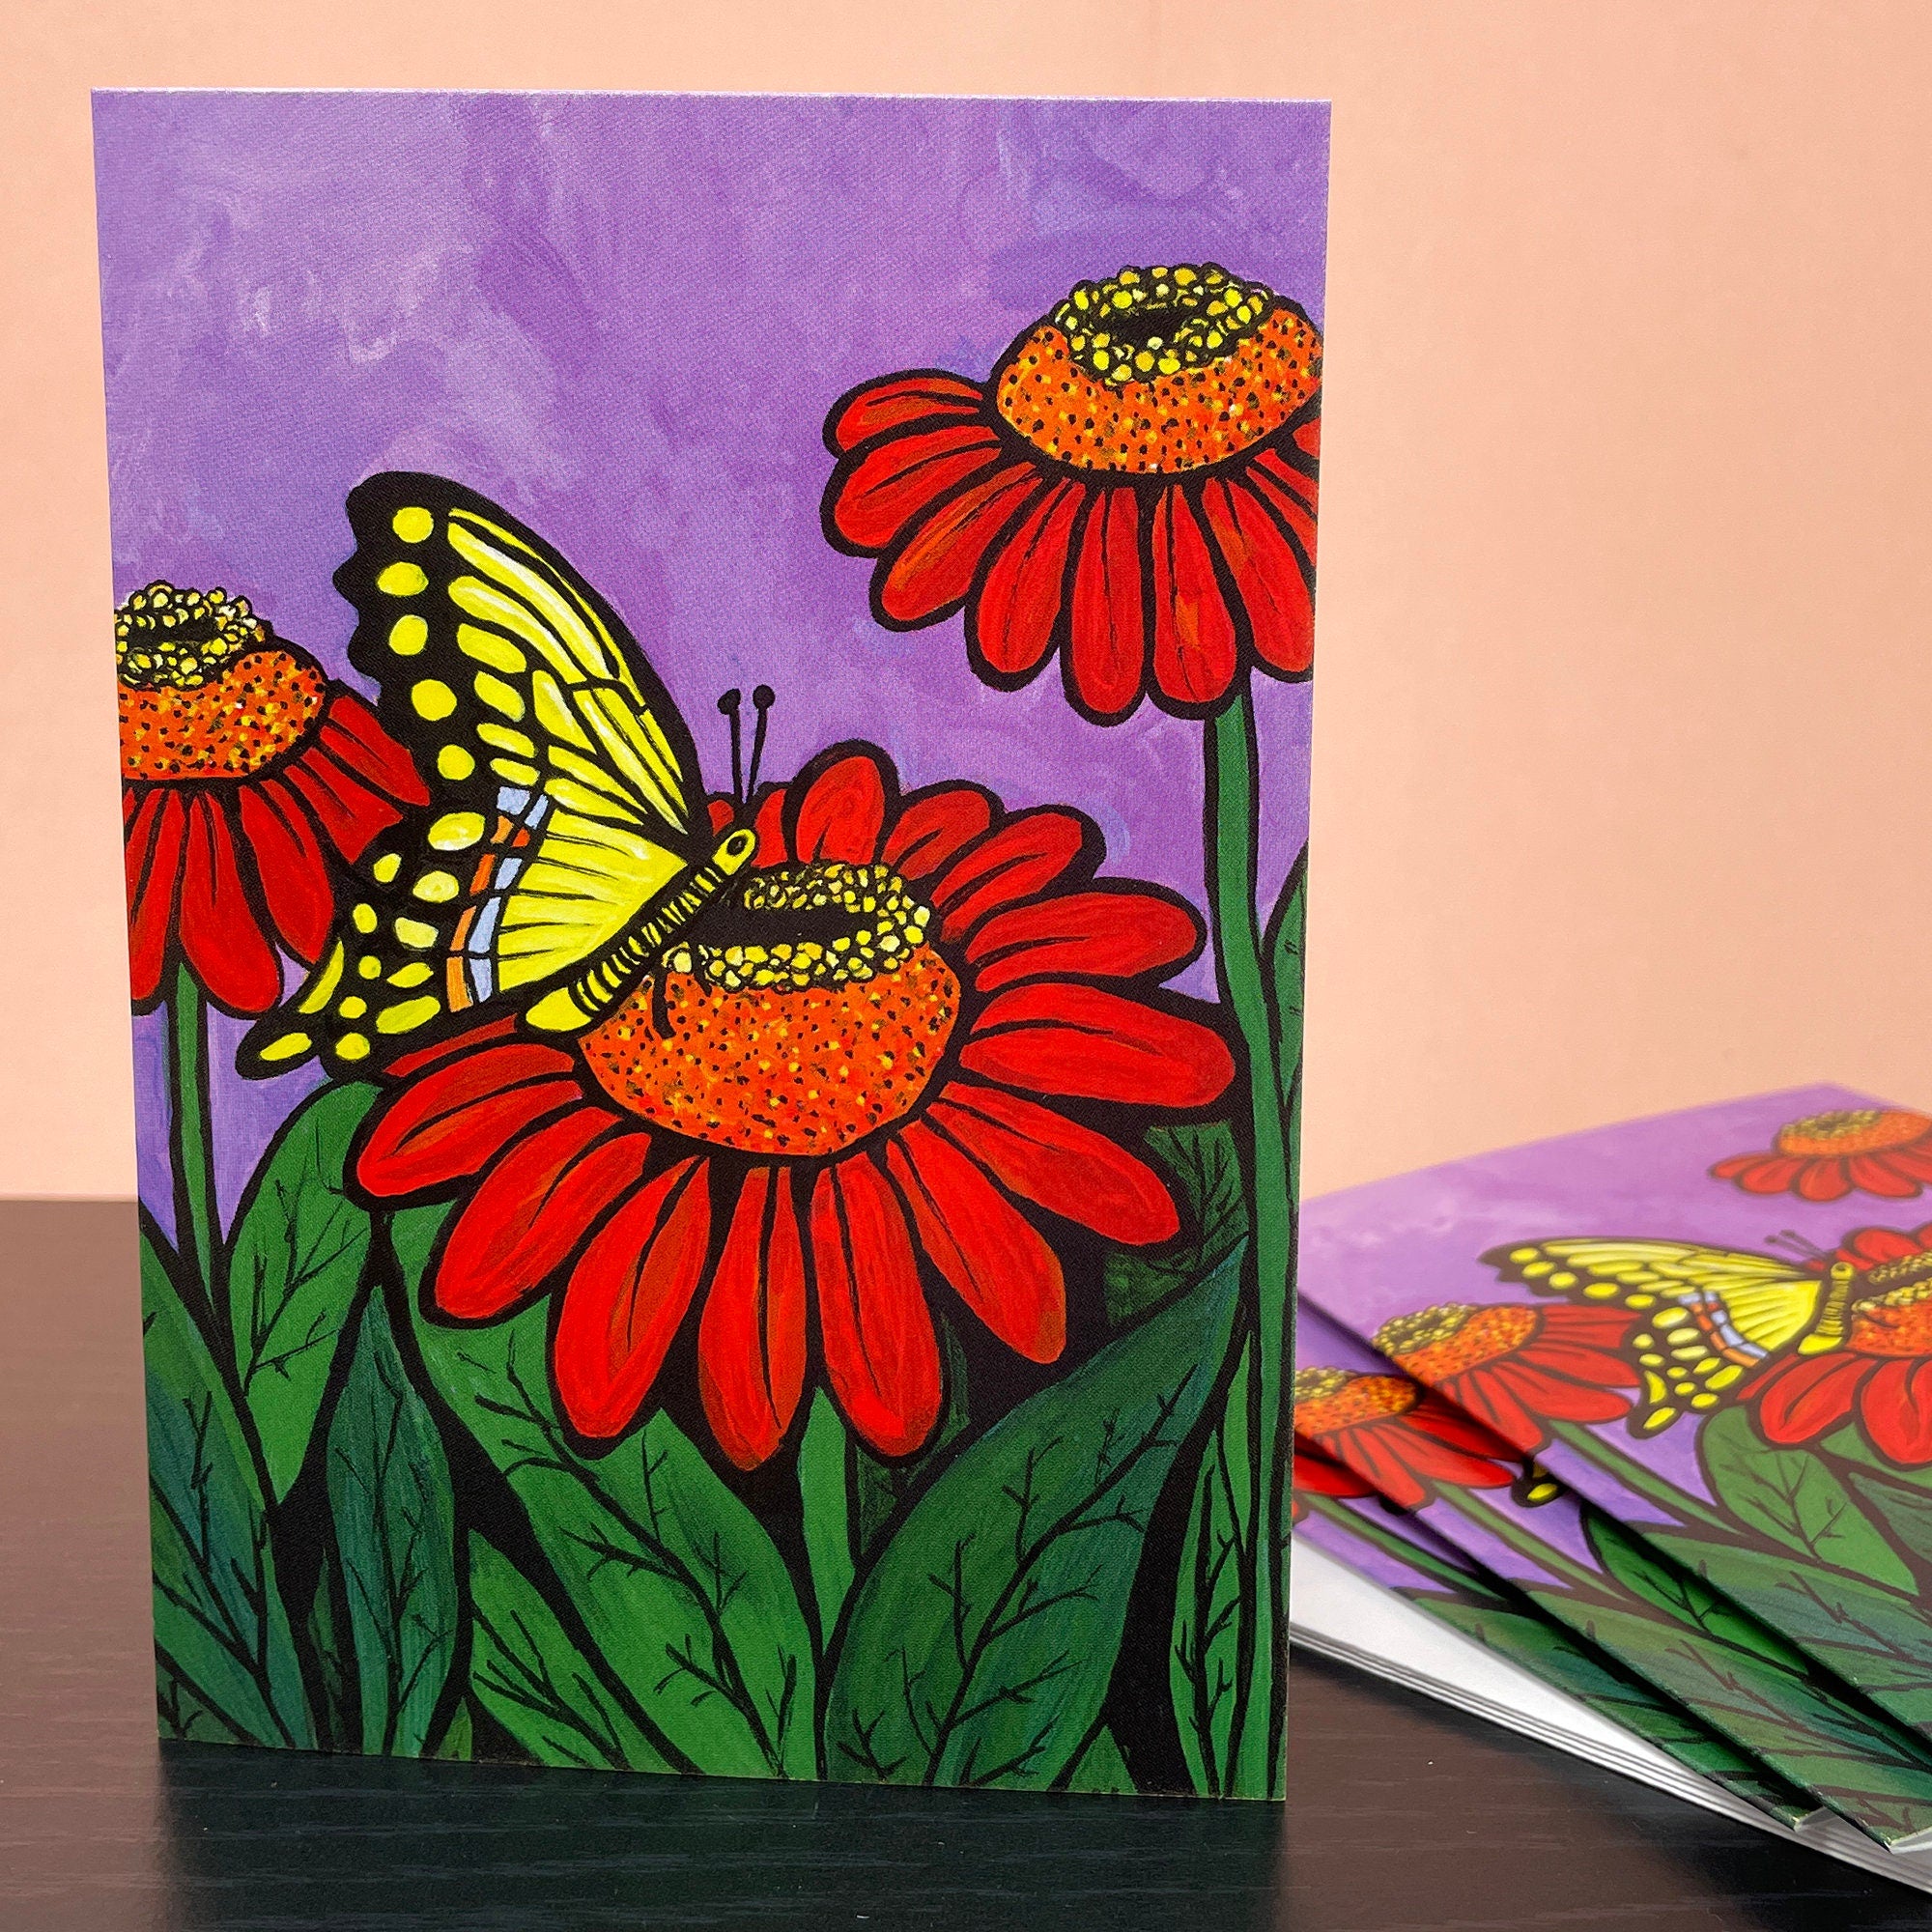 Blank Swallowtail Butterfly Cards with Envelopes Set - NoteCards with Butterfly and Zinnias for Thank You, Birthday, Wedding, Any Occasion